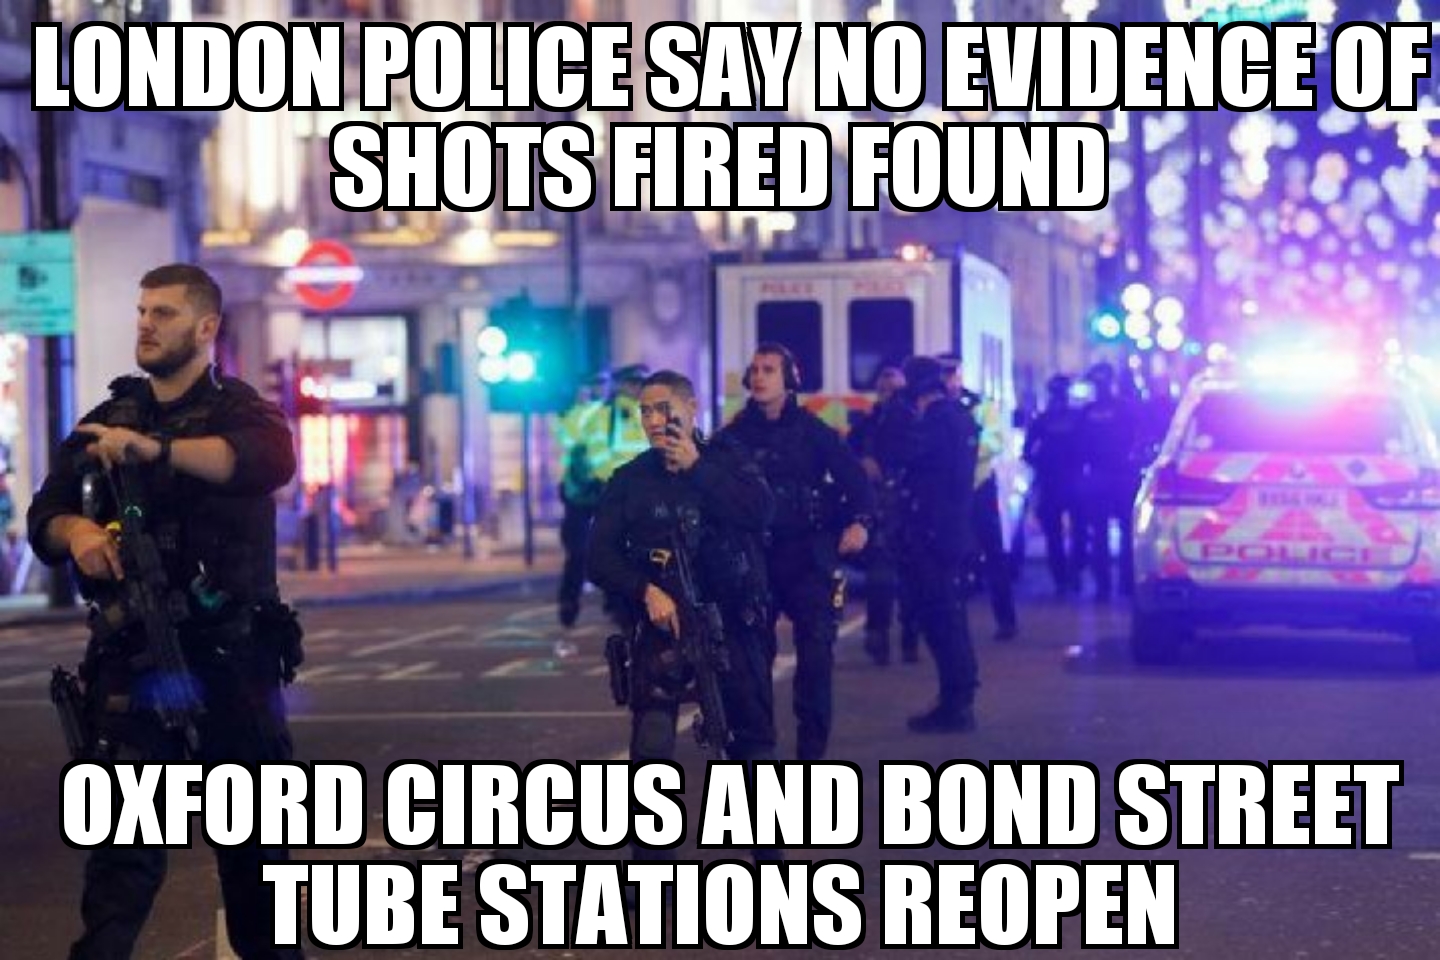 London police respond to ‘terror incident’